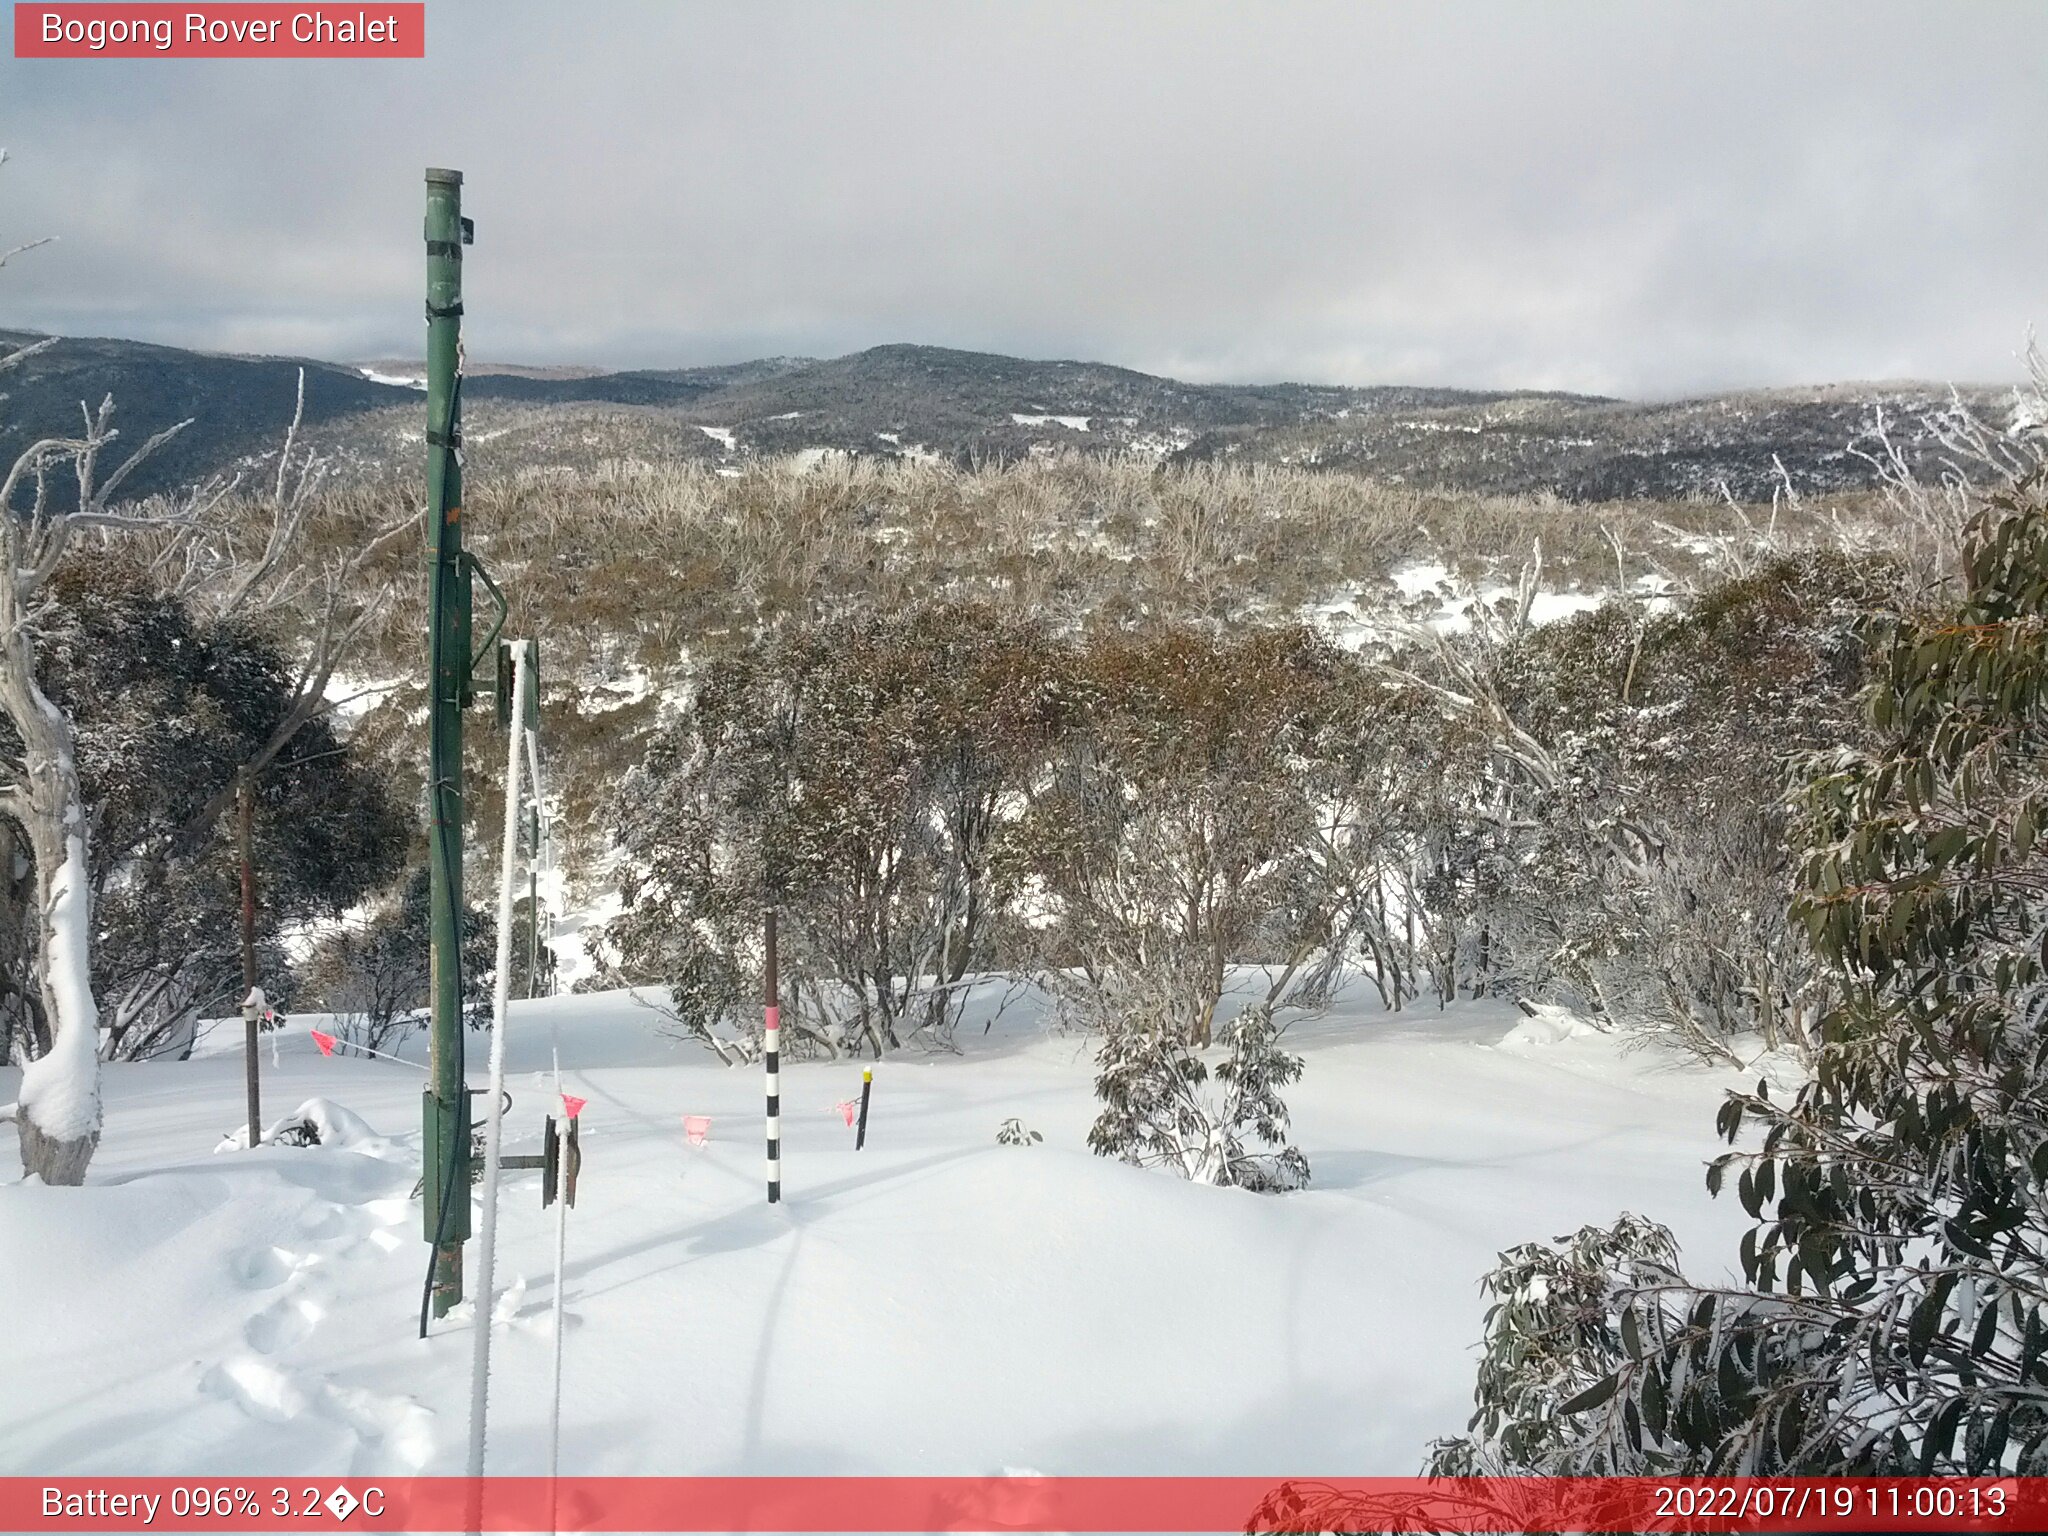 Bogong Web Cam 11:00am Tuesday 19th of July 2022